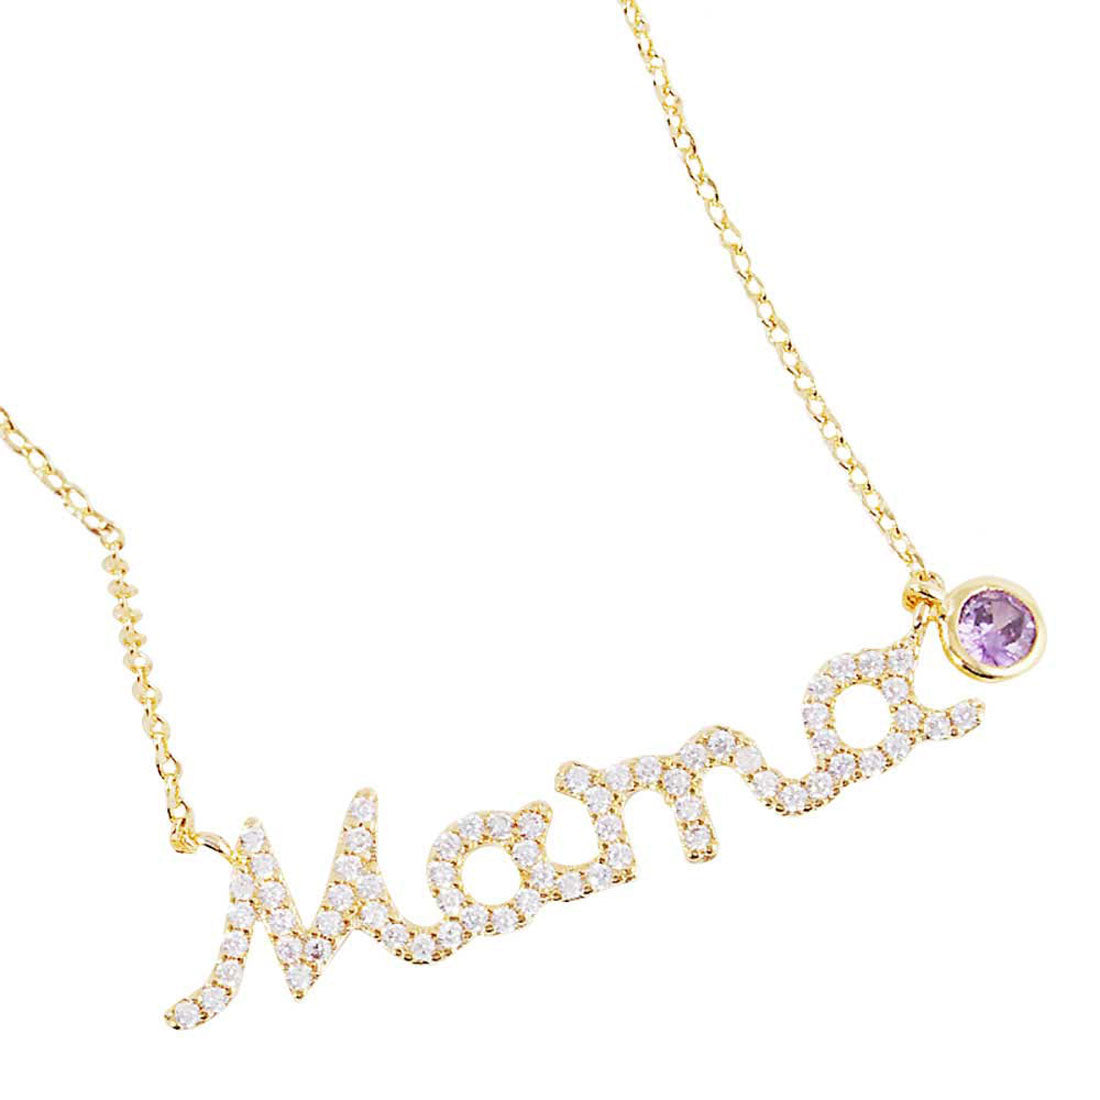 Gold June Birthstone MAMA Message Pendant Necklace. Elegant jewelry brightens up your brilliant life. No matter when, a mother is always there to accompany you and protect you. The mother necklace keeps our love close to mom.  Make your mother feel special by giving this MAMA pendant necklace as a gift and expressing your love for your mother on this Mother's Day.